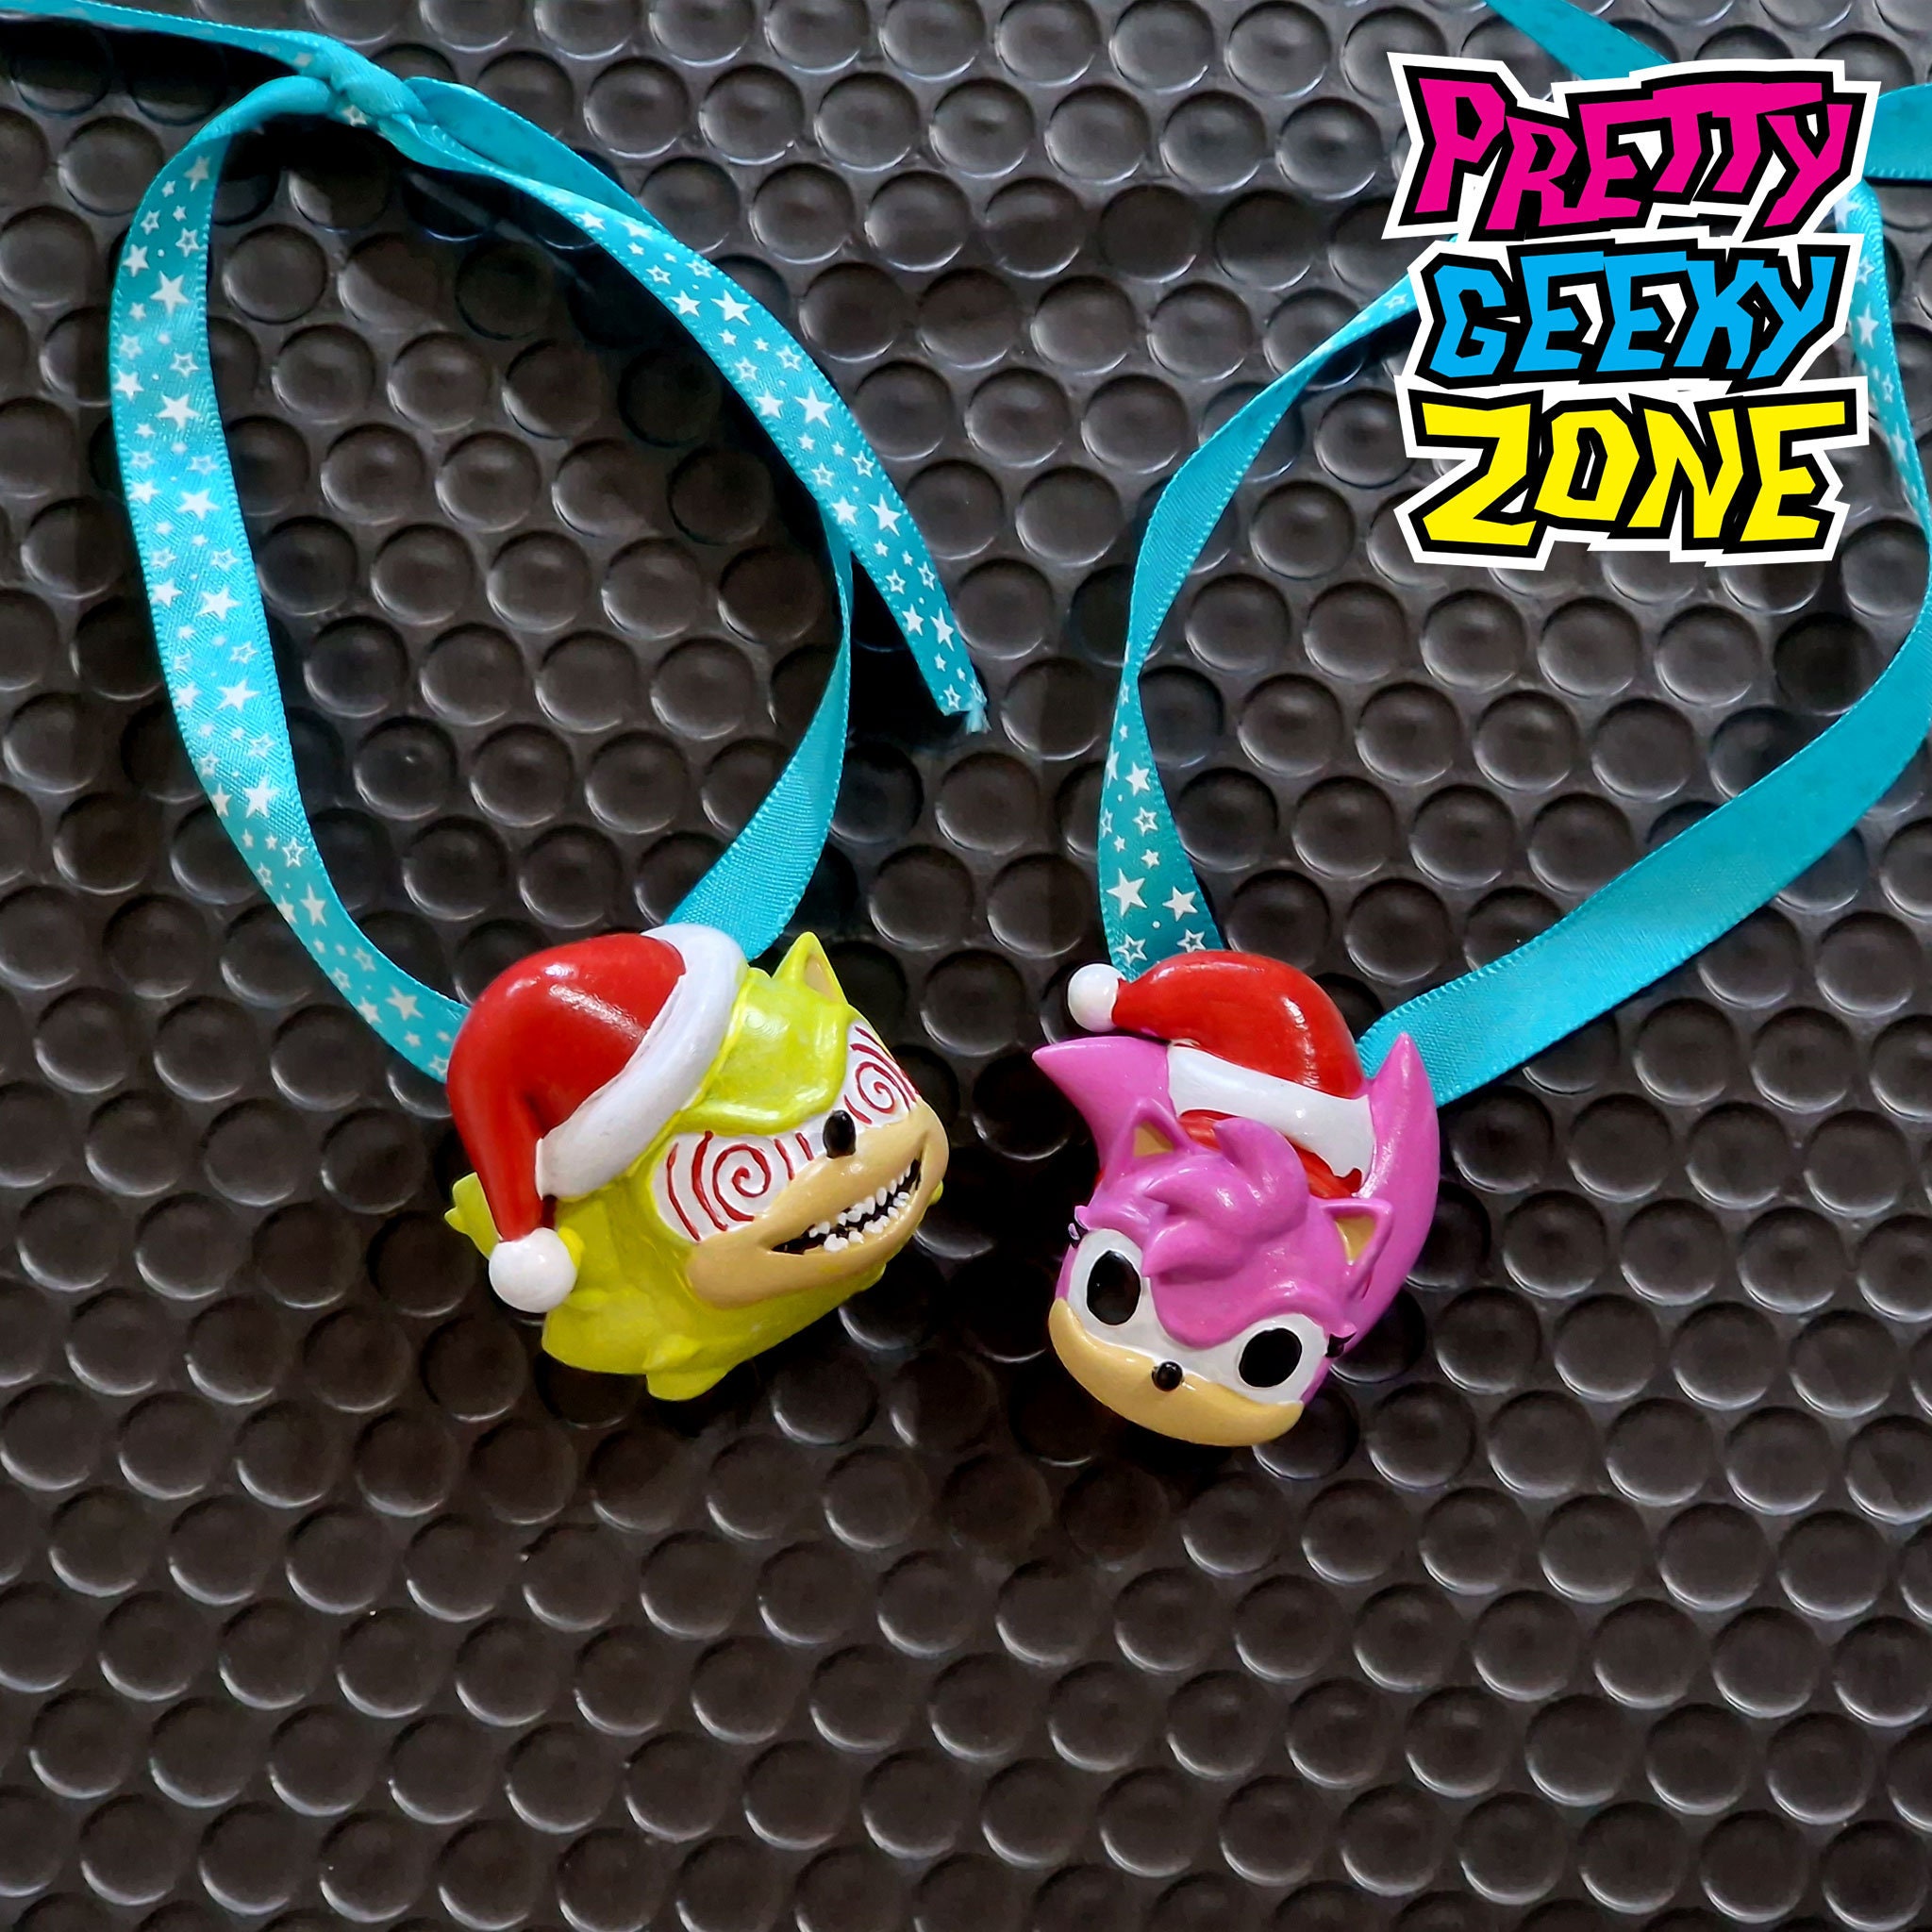 Sonic the Hedgehog Christmas Ornament Super Sonic Amy Rose -  Finland